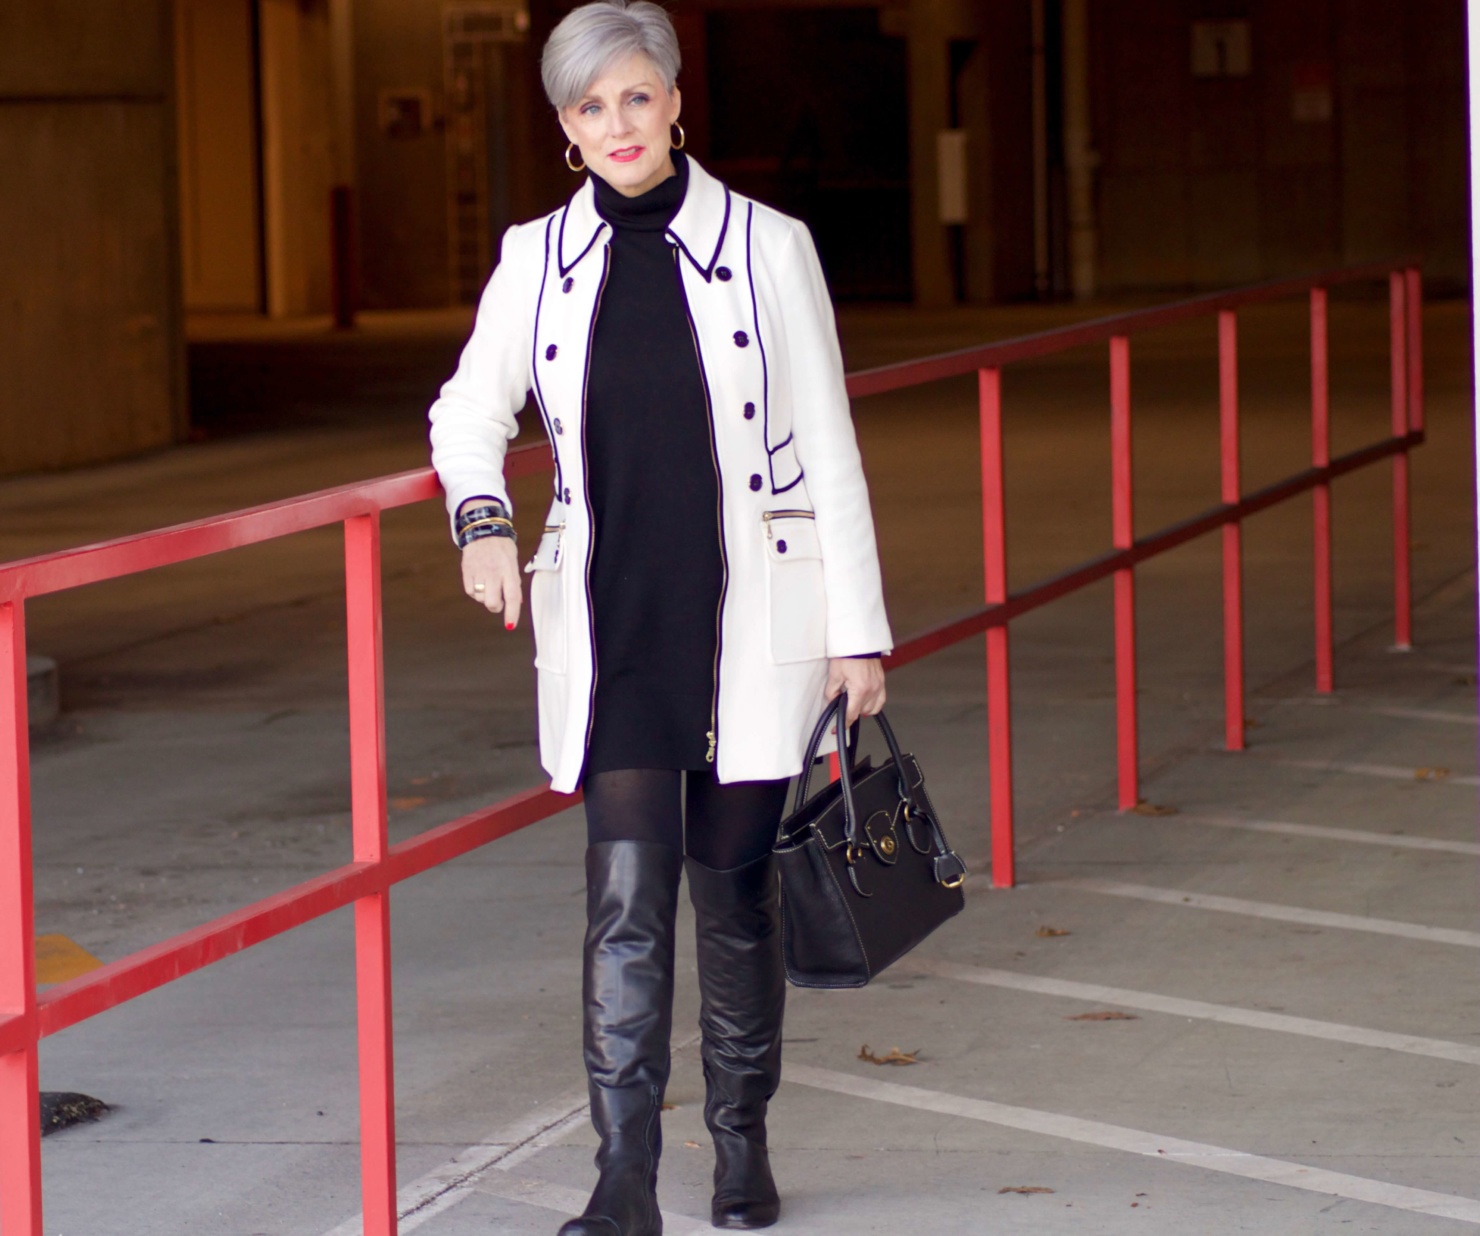 beth from Style at a Certain Age wears a cashmere turtleneck dress, black over the knee boots, and ivory and black coat